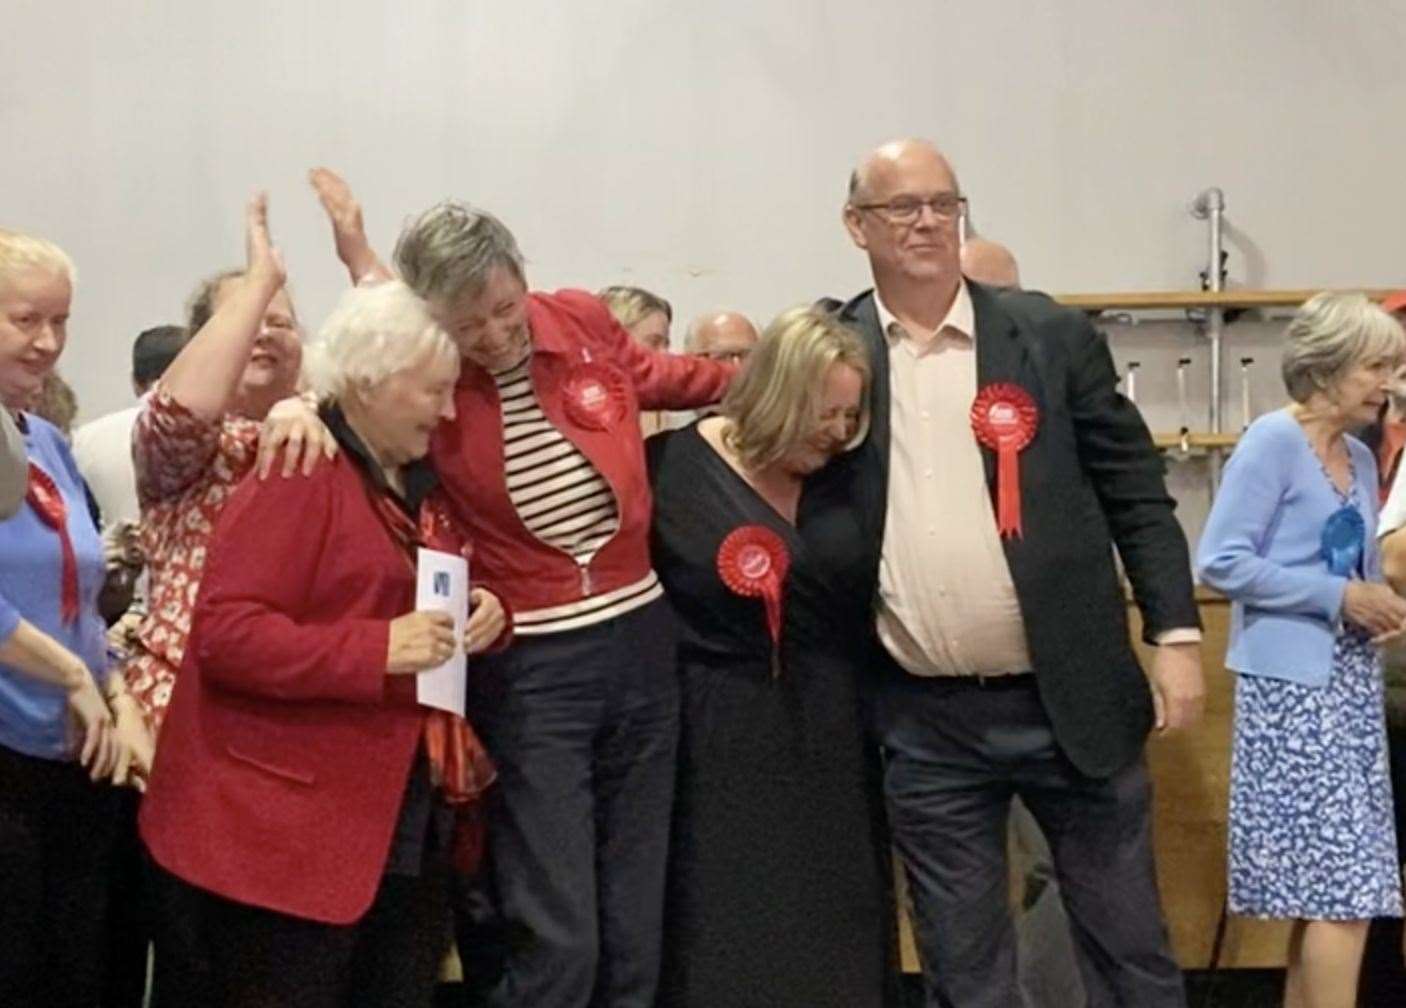 New council leader Rick Everitt celebrates with labour counillors after securing a majority in Thanet District Council